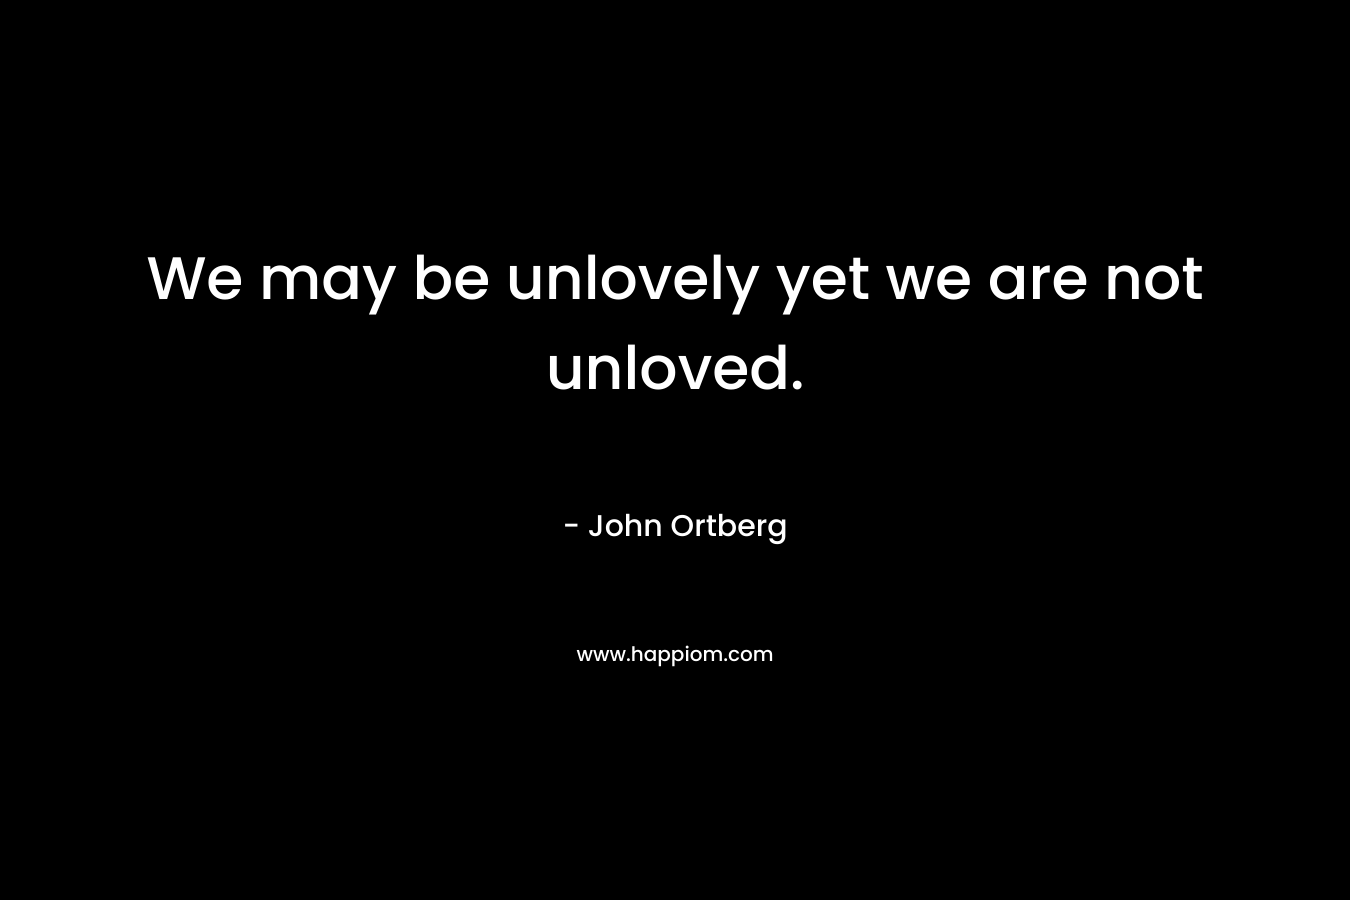 We may be unlovely yet we are not unloved. – John Ortberg